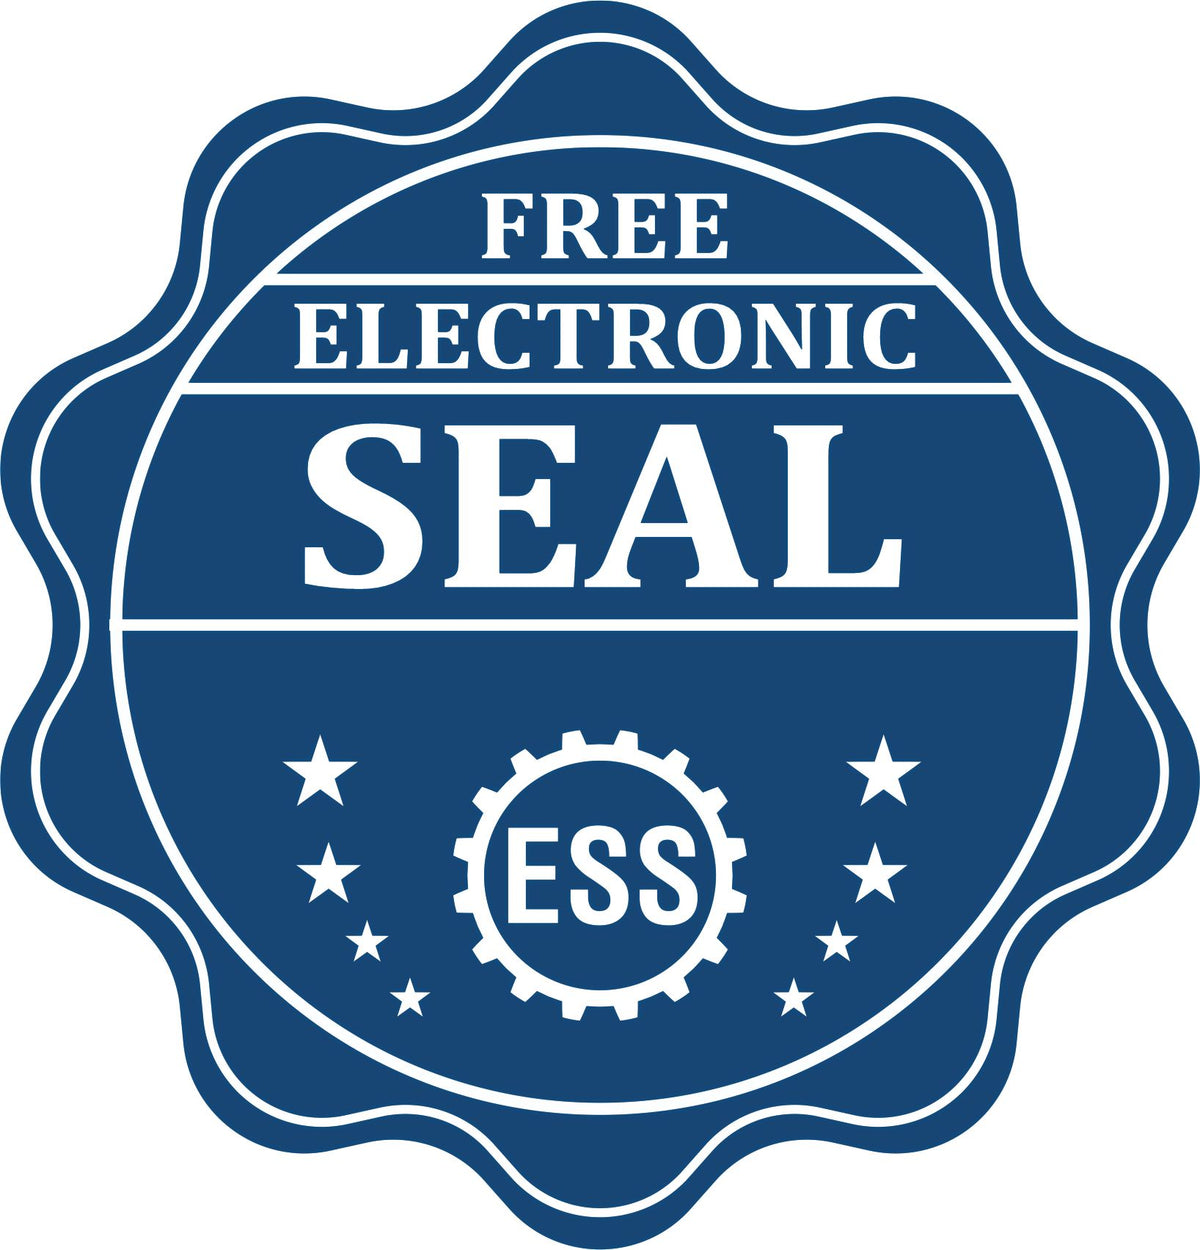 A badge showing a free electronic seal for the Soft West Virginia Professional Geologist Seal with stars and the ESS gear on the emblem.